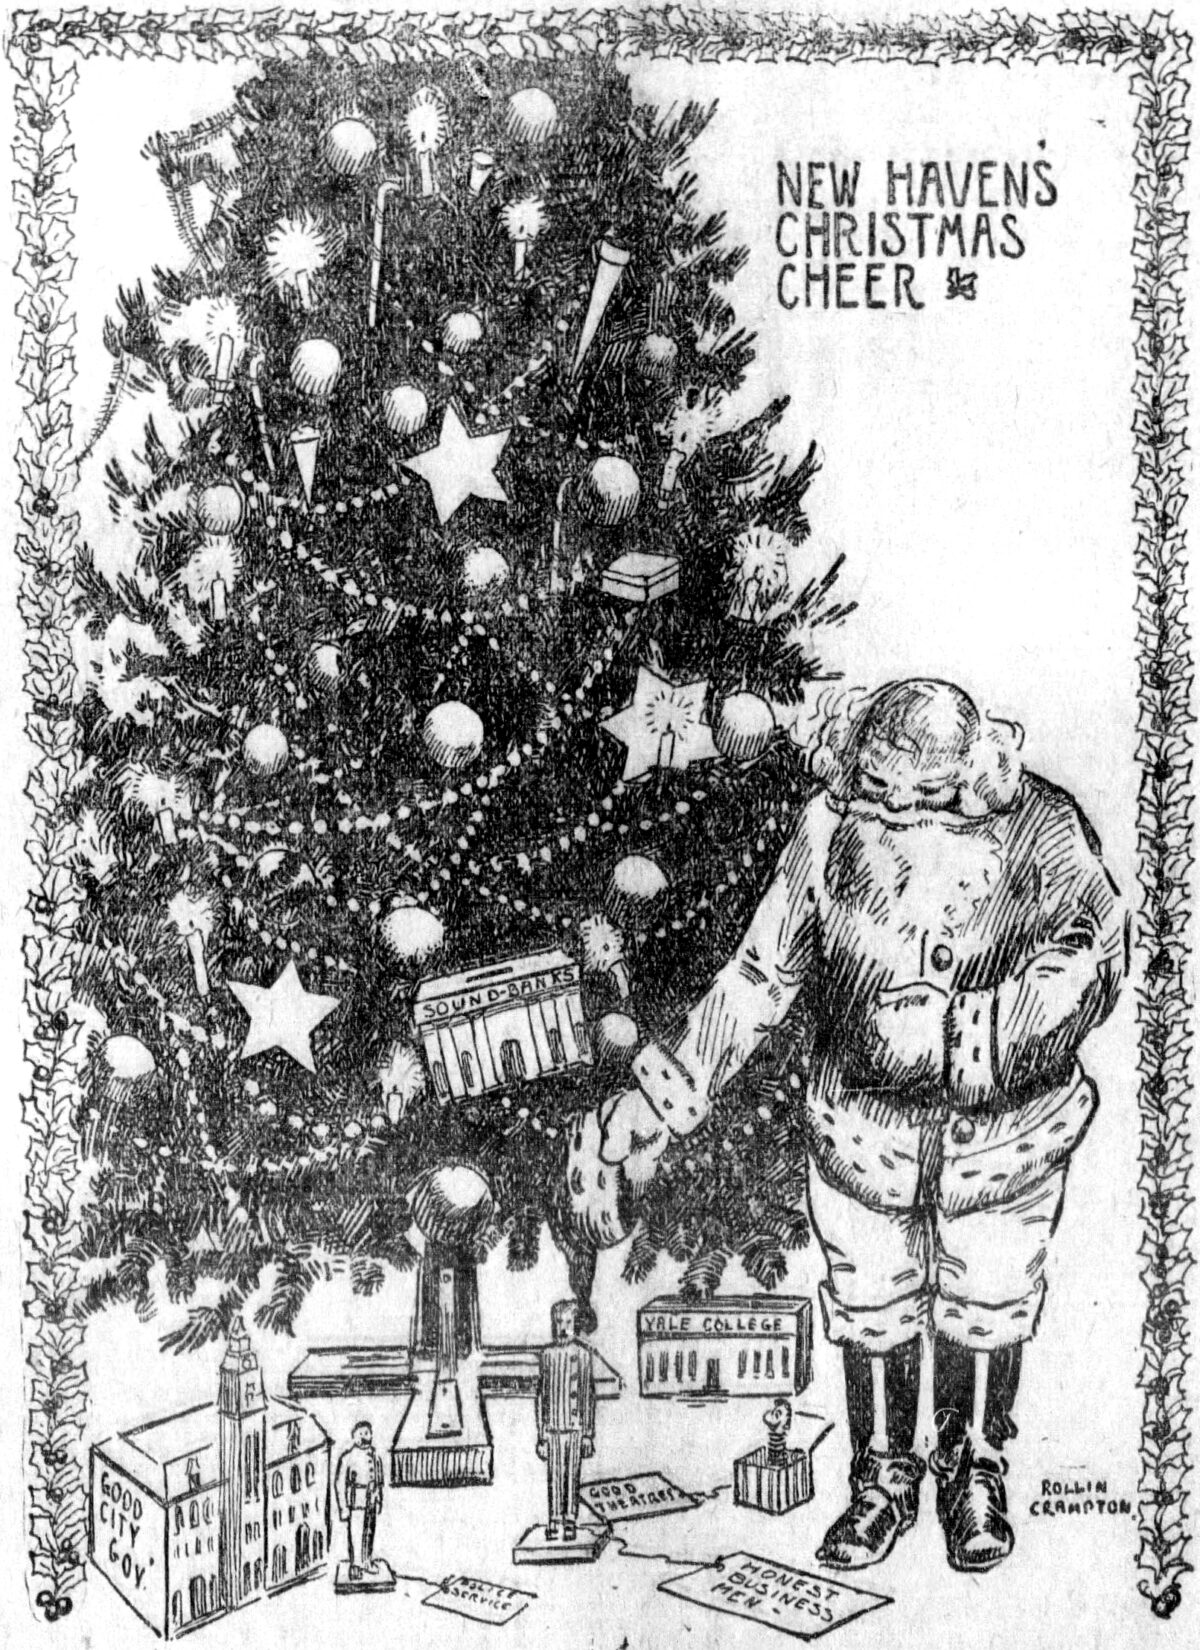 Christmas greeting from the December 25, 1907 Yale Daily News.